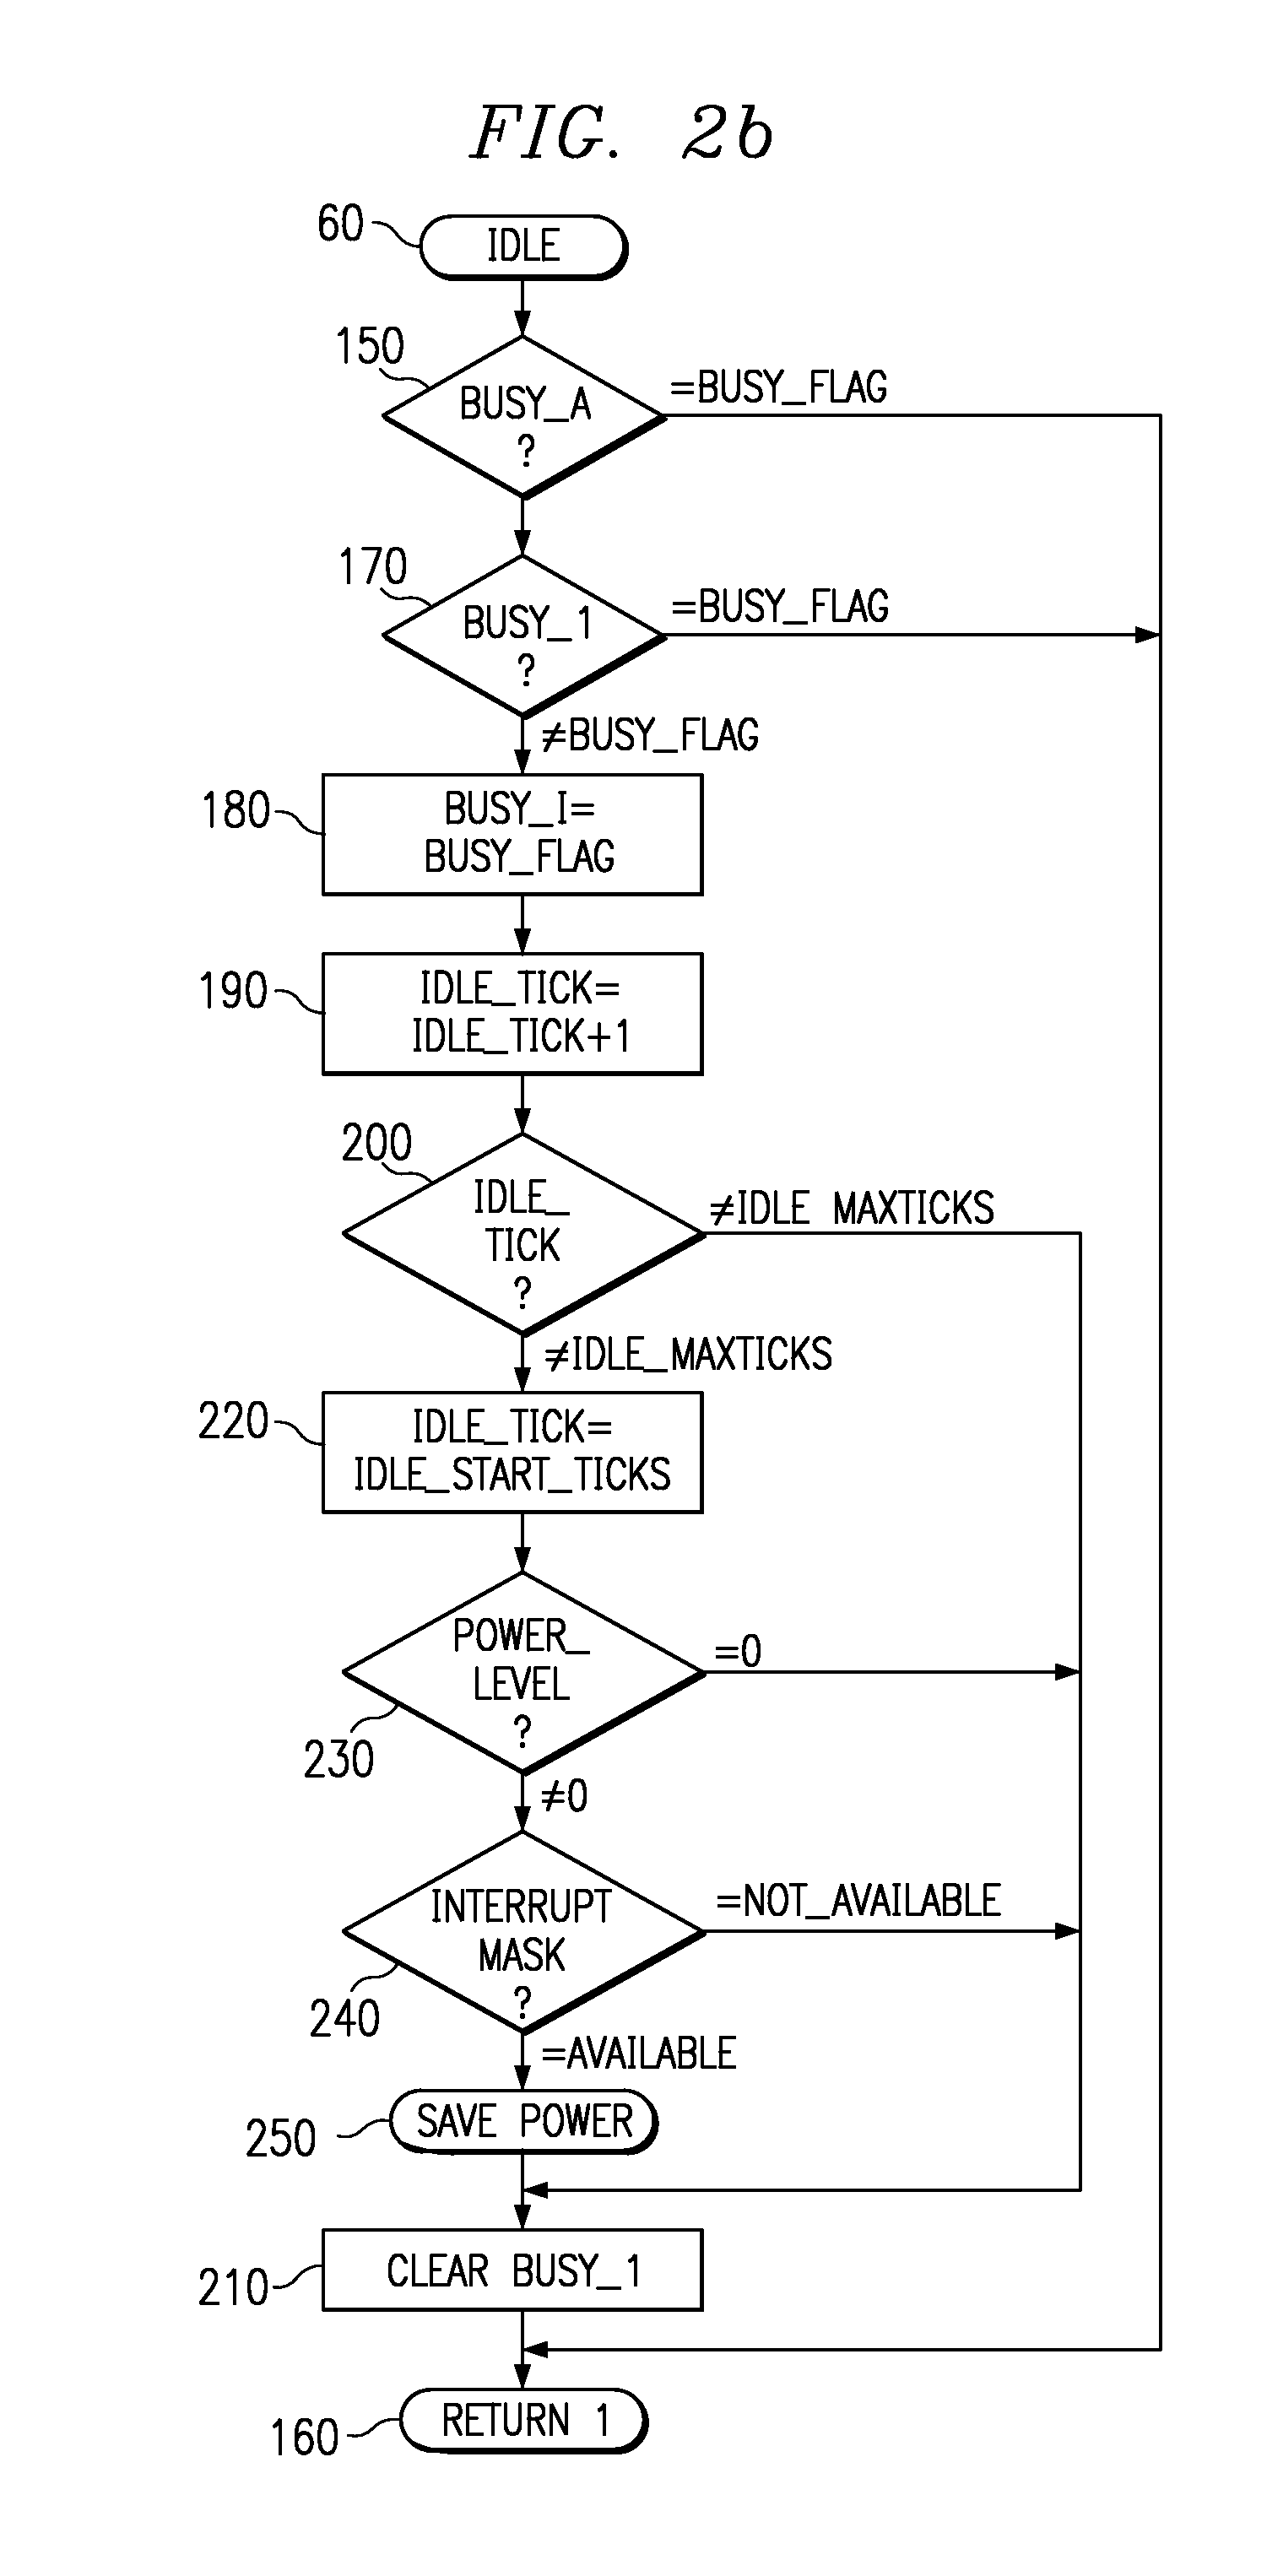 Method For Implementing Thermal Management In A Processor And/Or Apparatus And/Or System Employing The Same